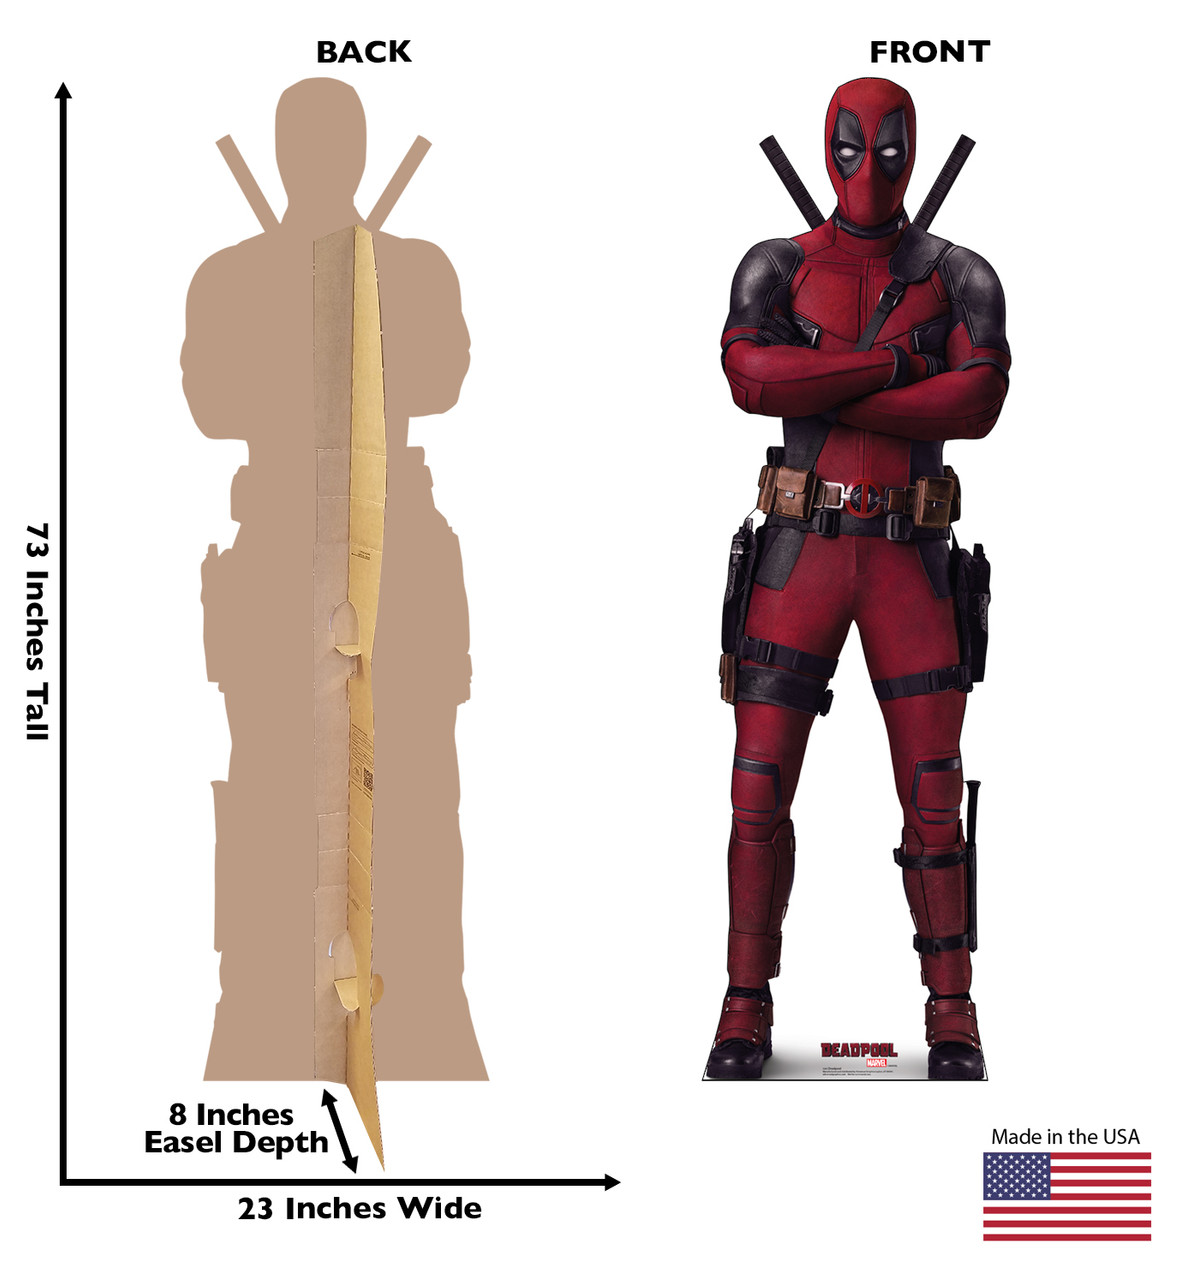 Life-size cardboard standee of Deadpool with back and front dimensions.